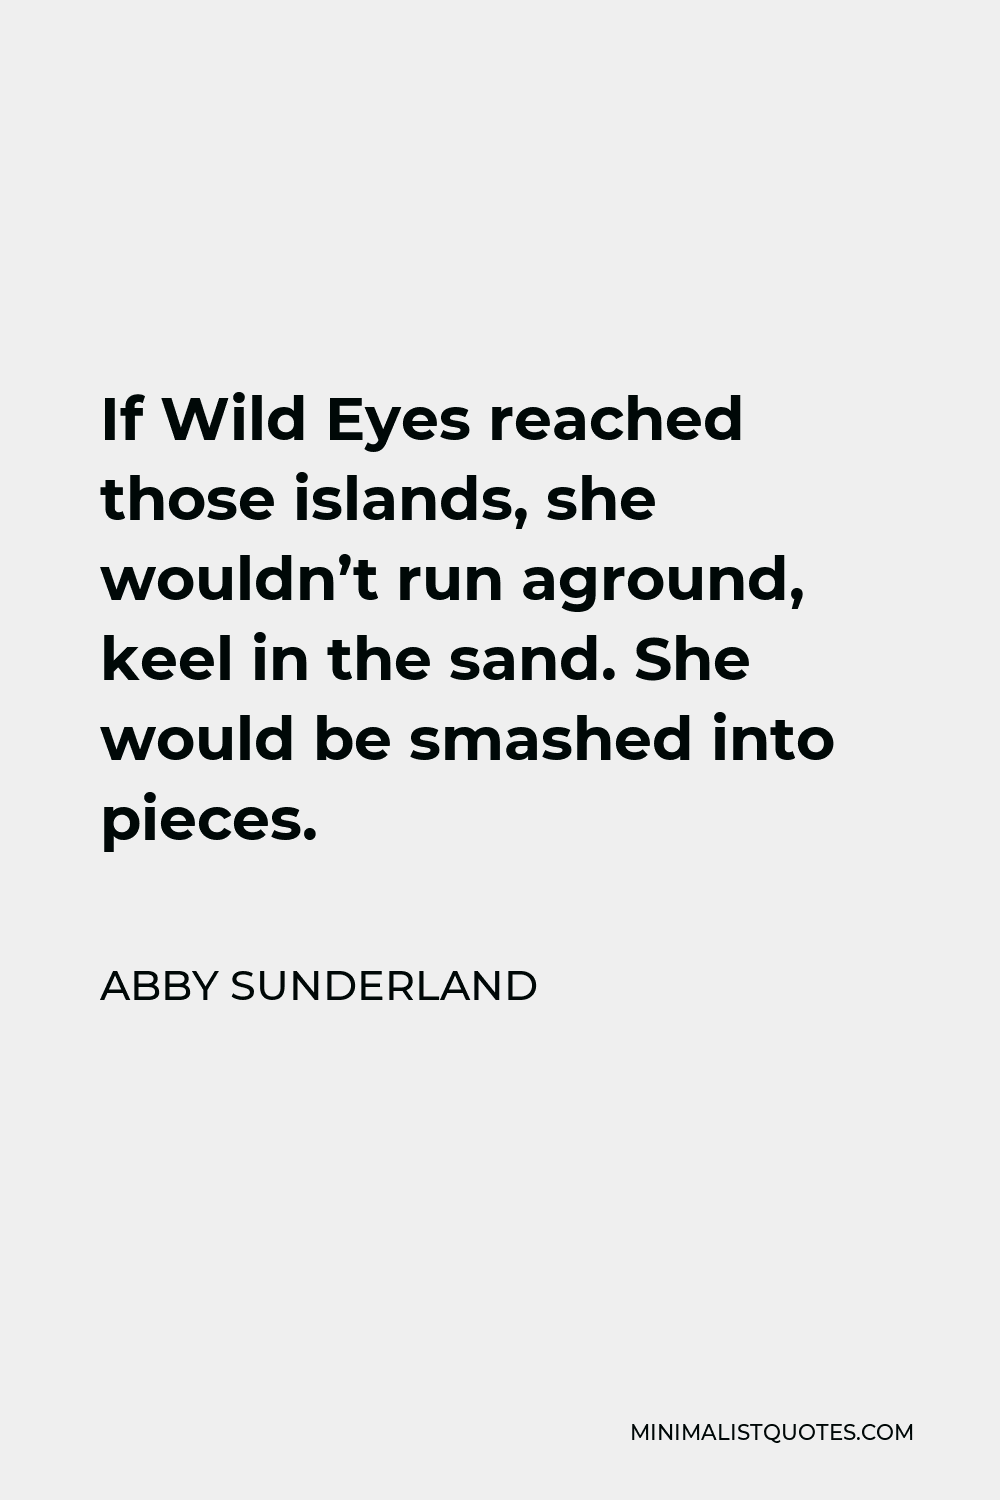 Abby Sunderland Quote - If Wild Eyes reached those islands, she wouldn’t run aground, keel in the sand. She would be smashed into pieces.